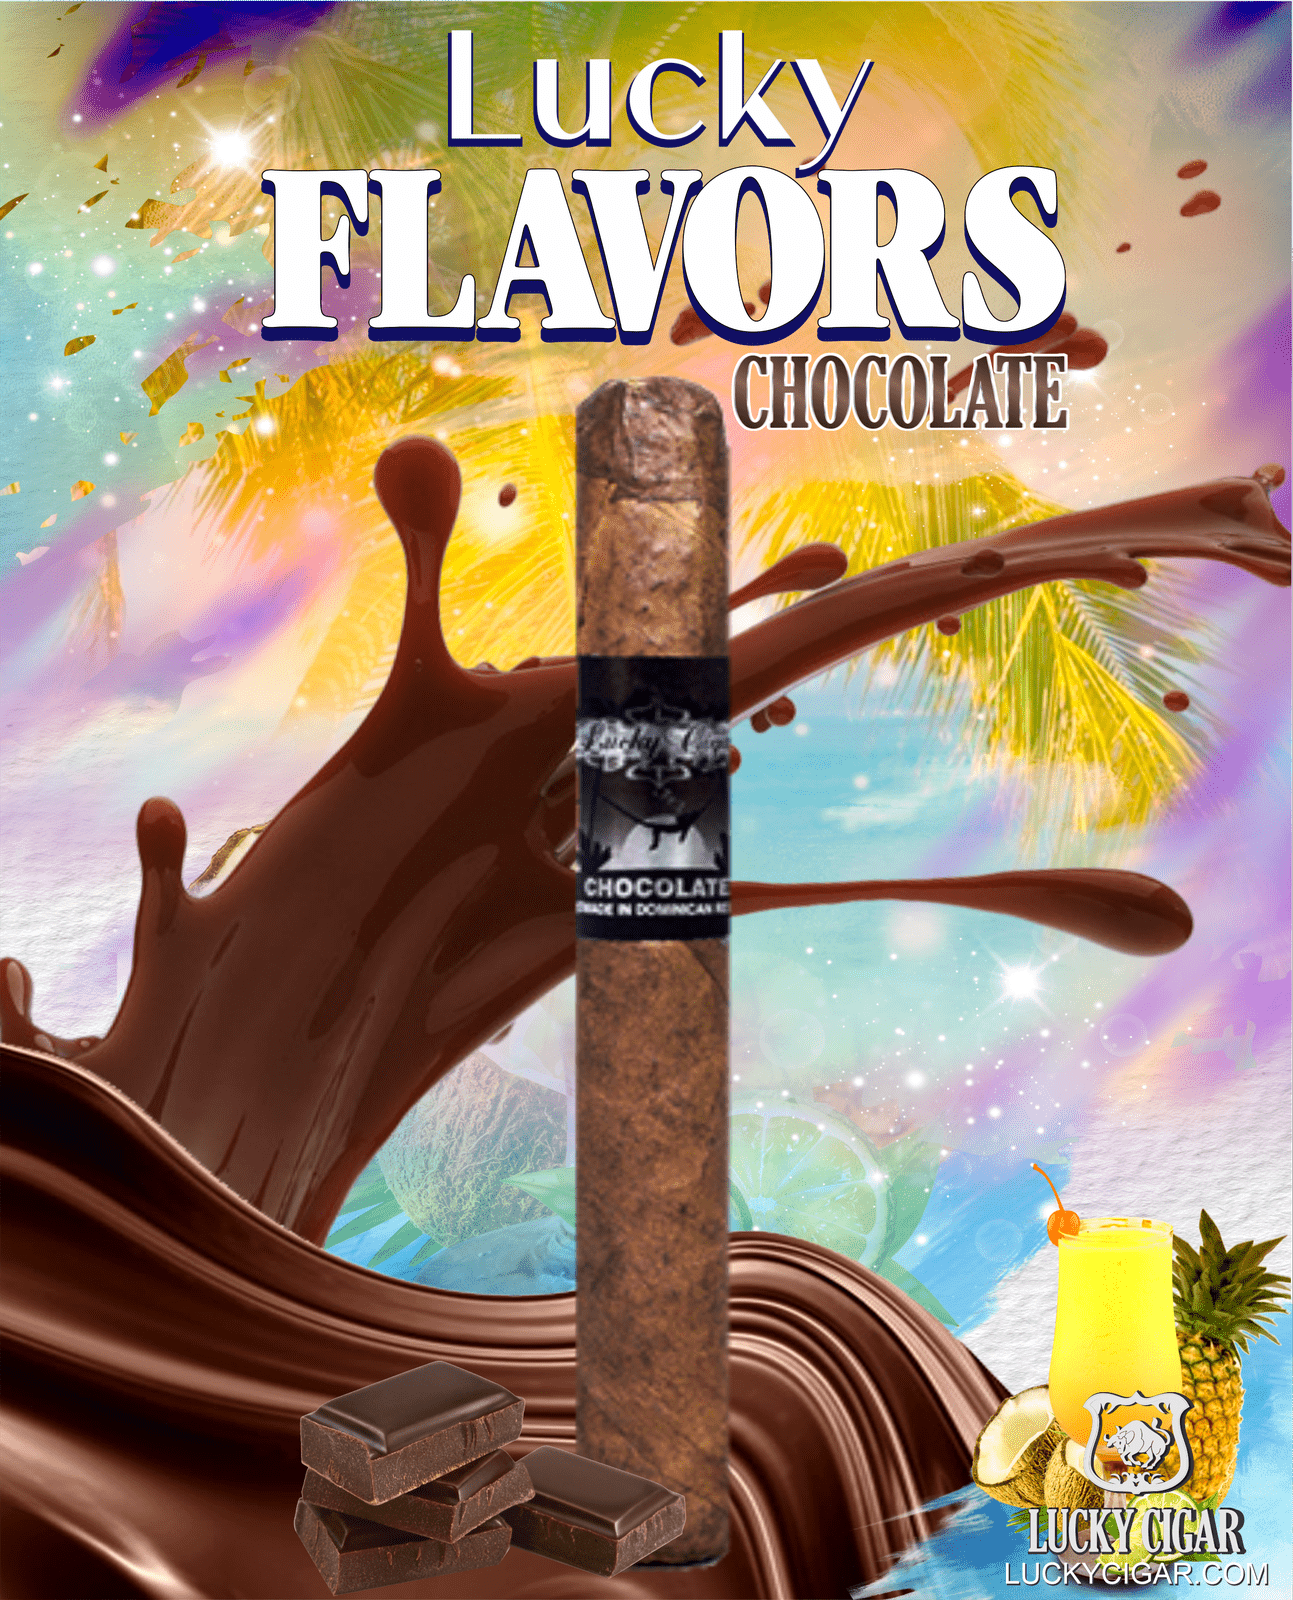 Flavored Cigars: Lucky Flavors Chocolate 5x42 Cigar